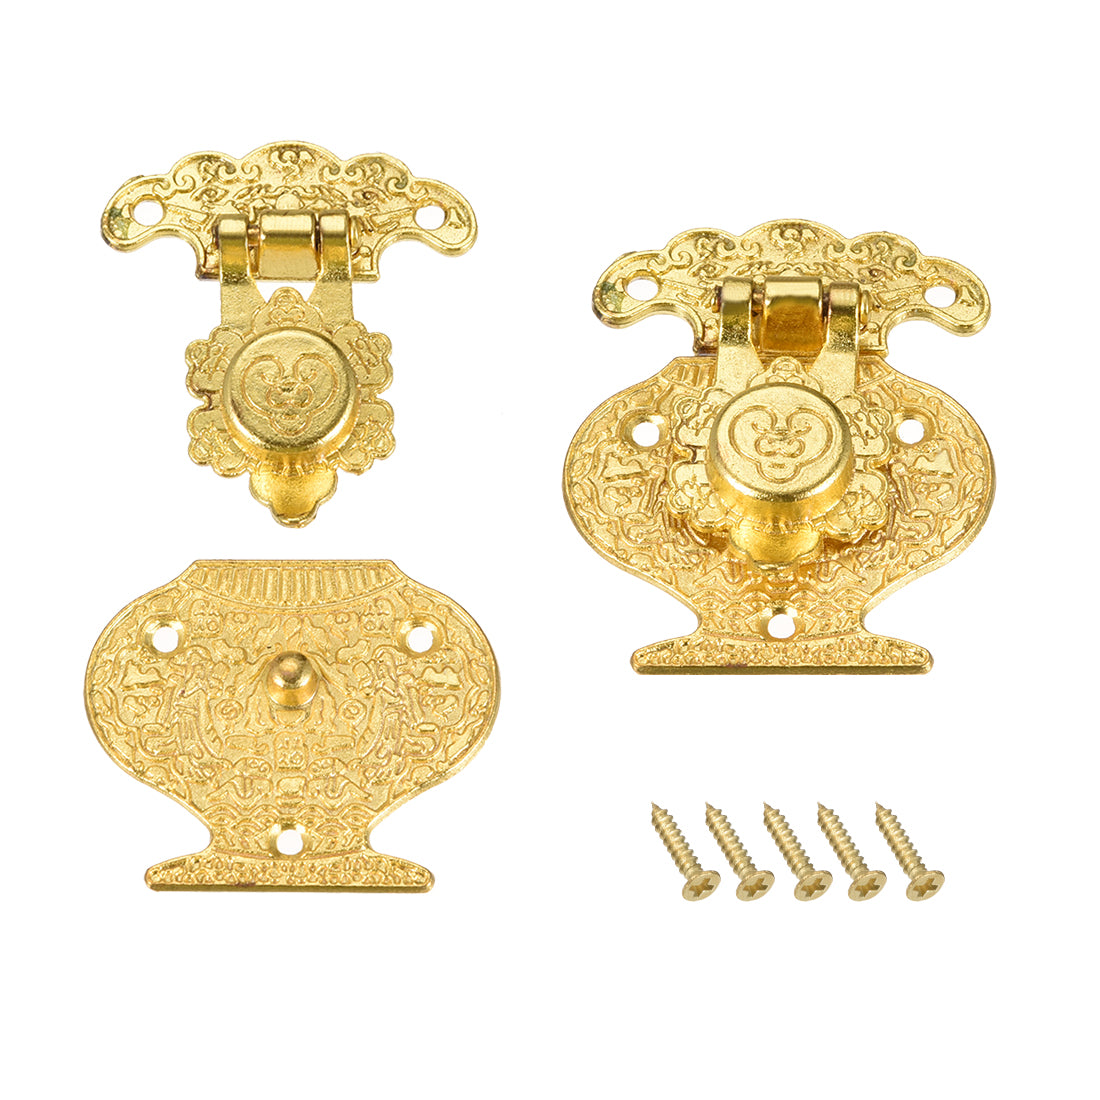 uxcell Uxcell 2 Sets Wood Case Chest Box Rectangle Clasp Closure Hasp Latches Gold Tone 51 x 41mm